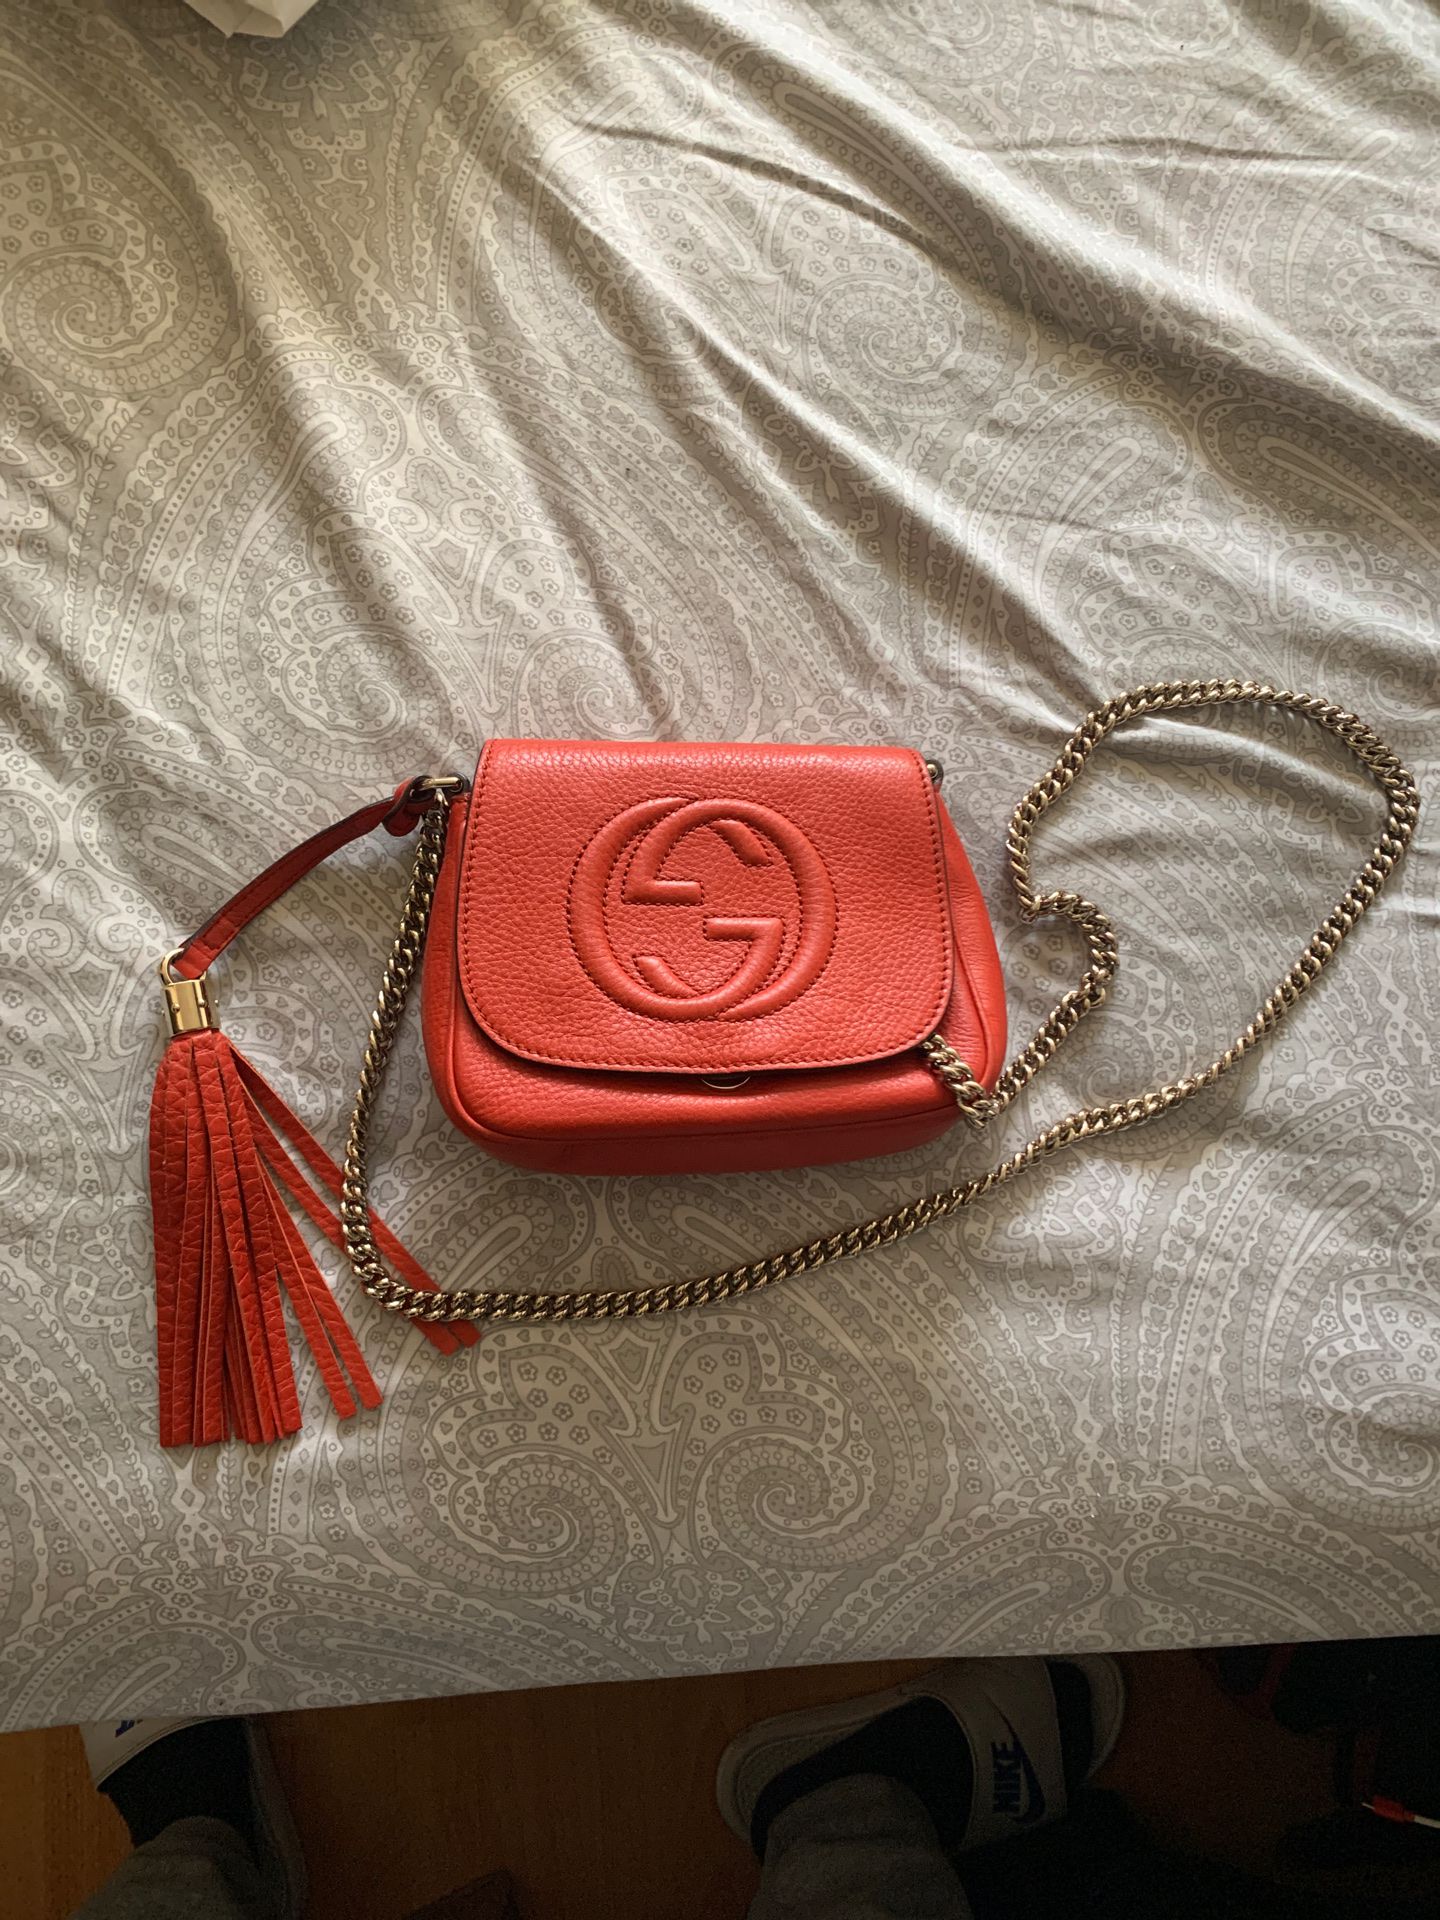 Gucci bag (red )